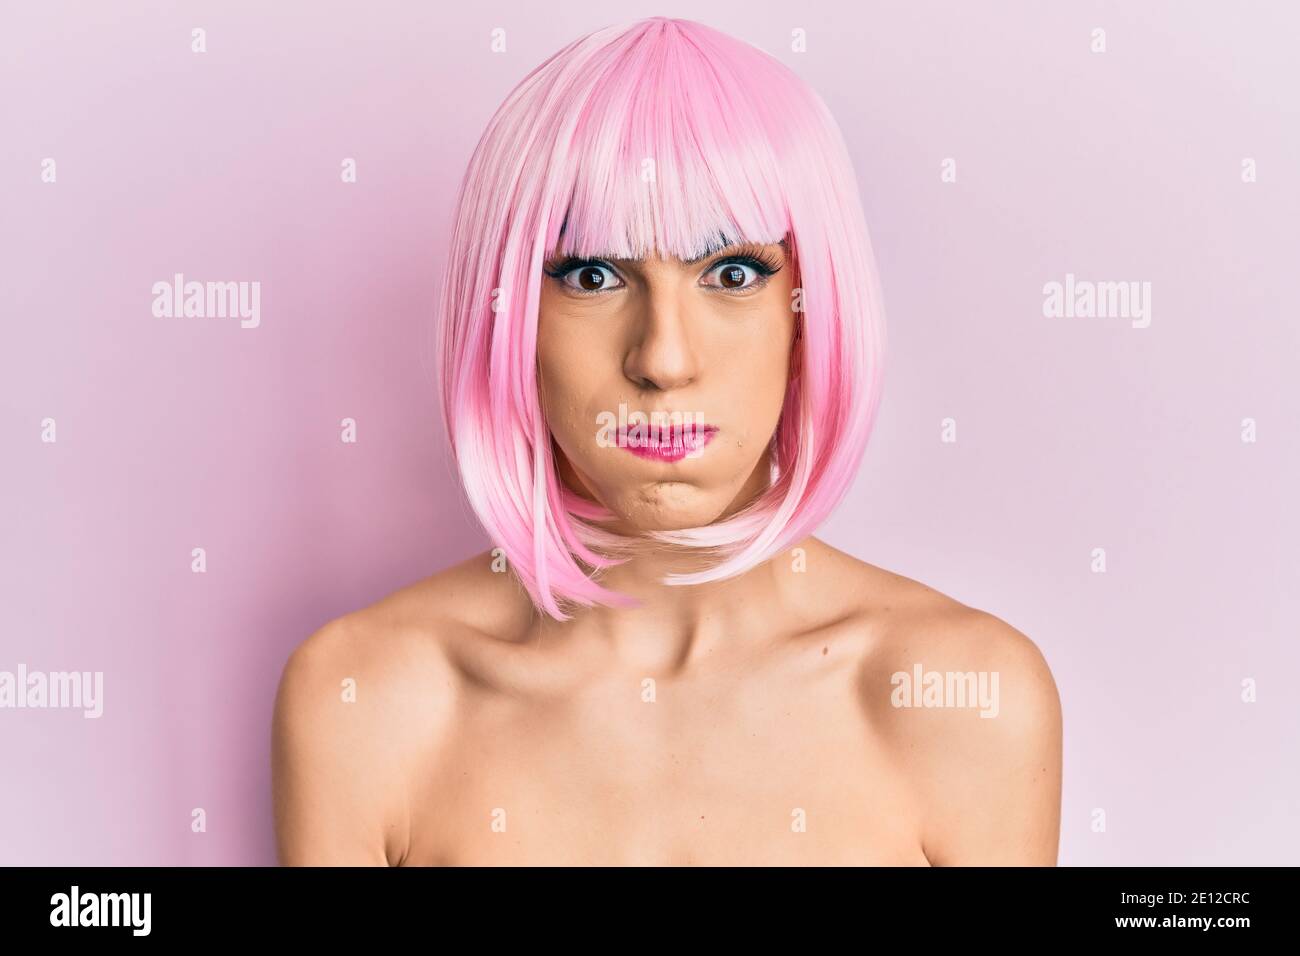 Young man wearing woman make up wearing pink wig puffing cheeks with funny face. mouth inflated with air, crazy expression. Stock Photo